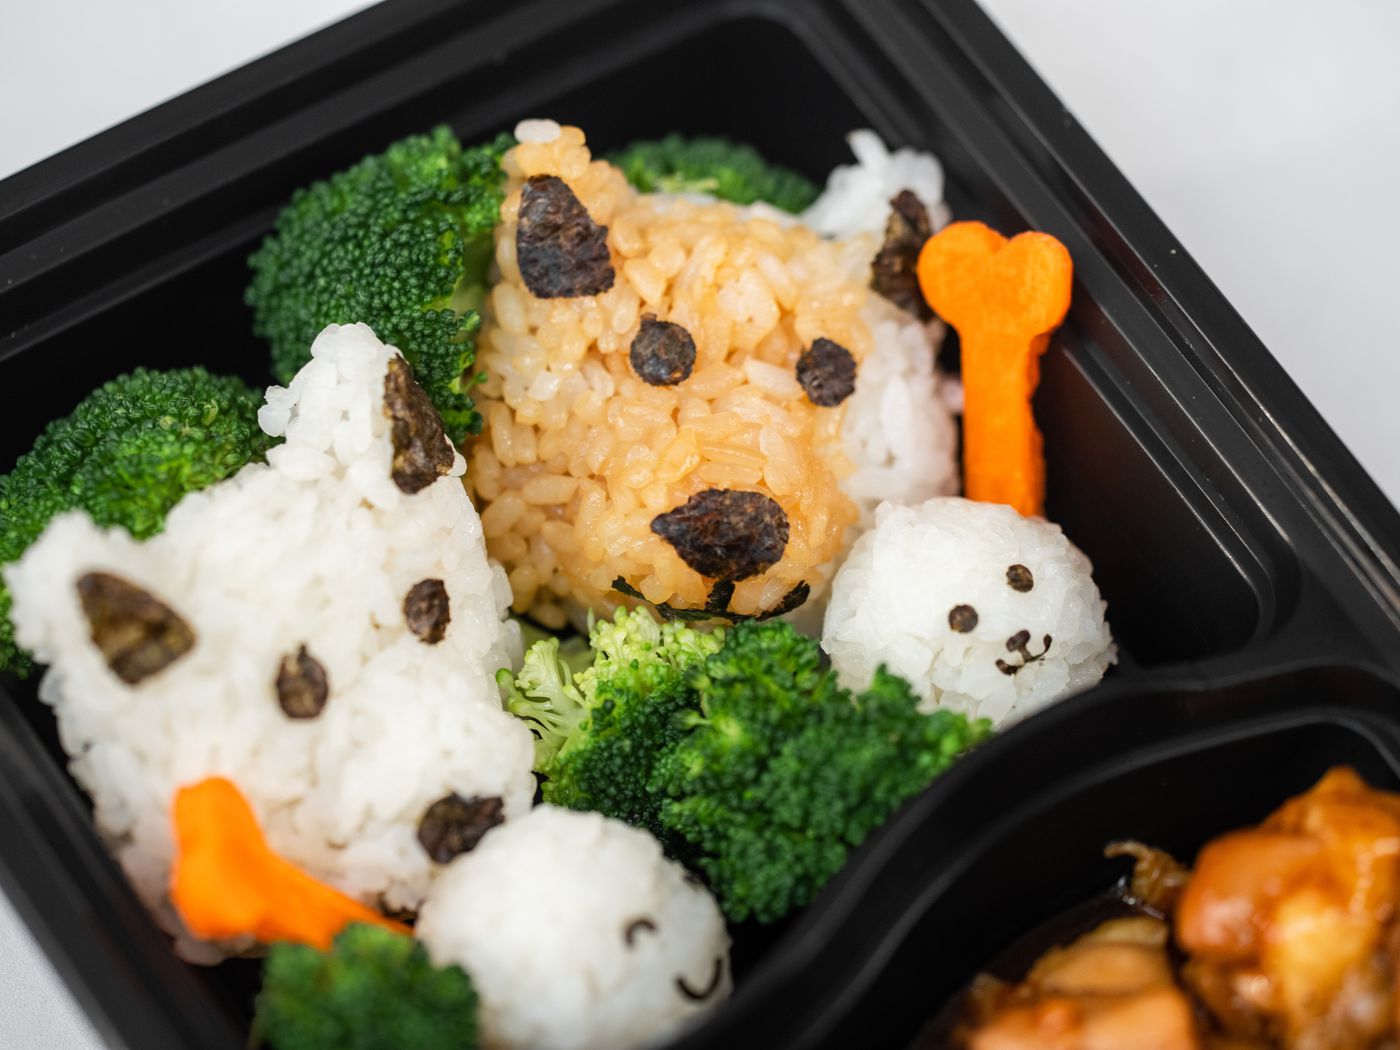 How Dallas's Most Adorable Bento Box Is Made At Pop Up Okaeri Cafe